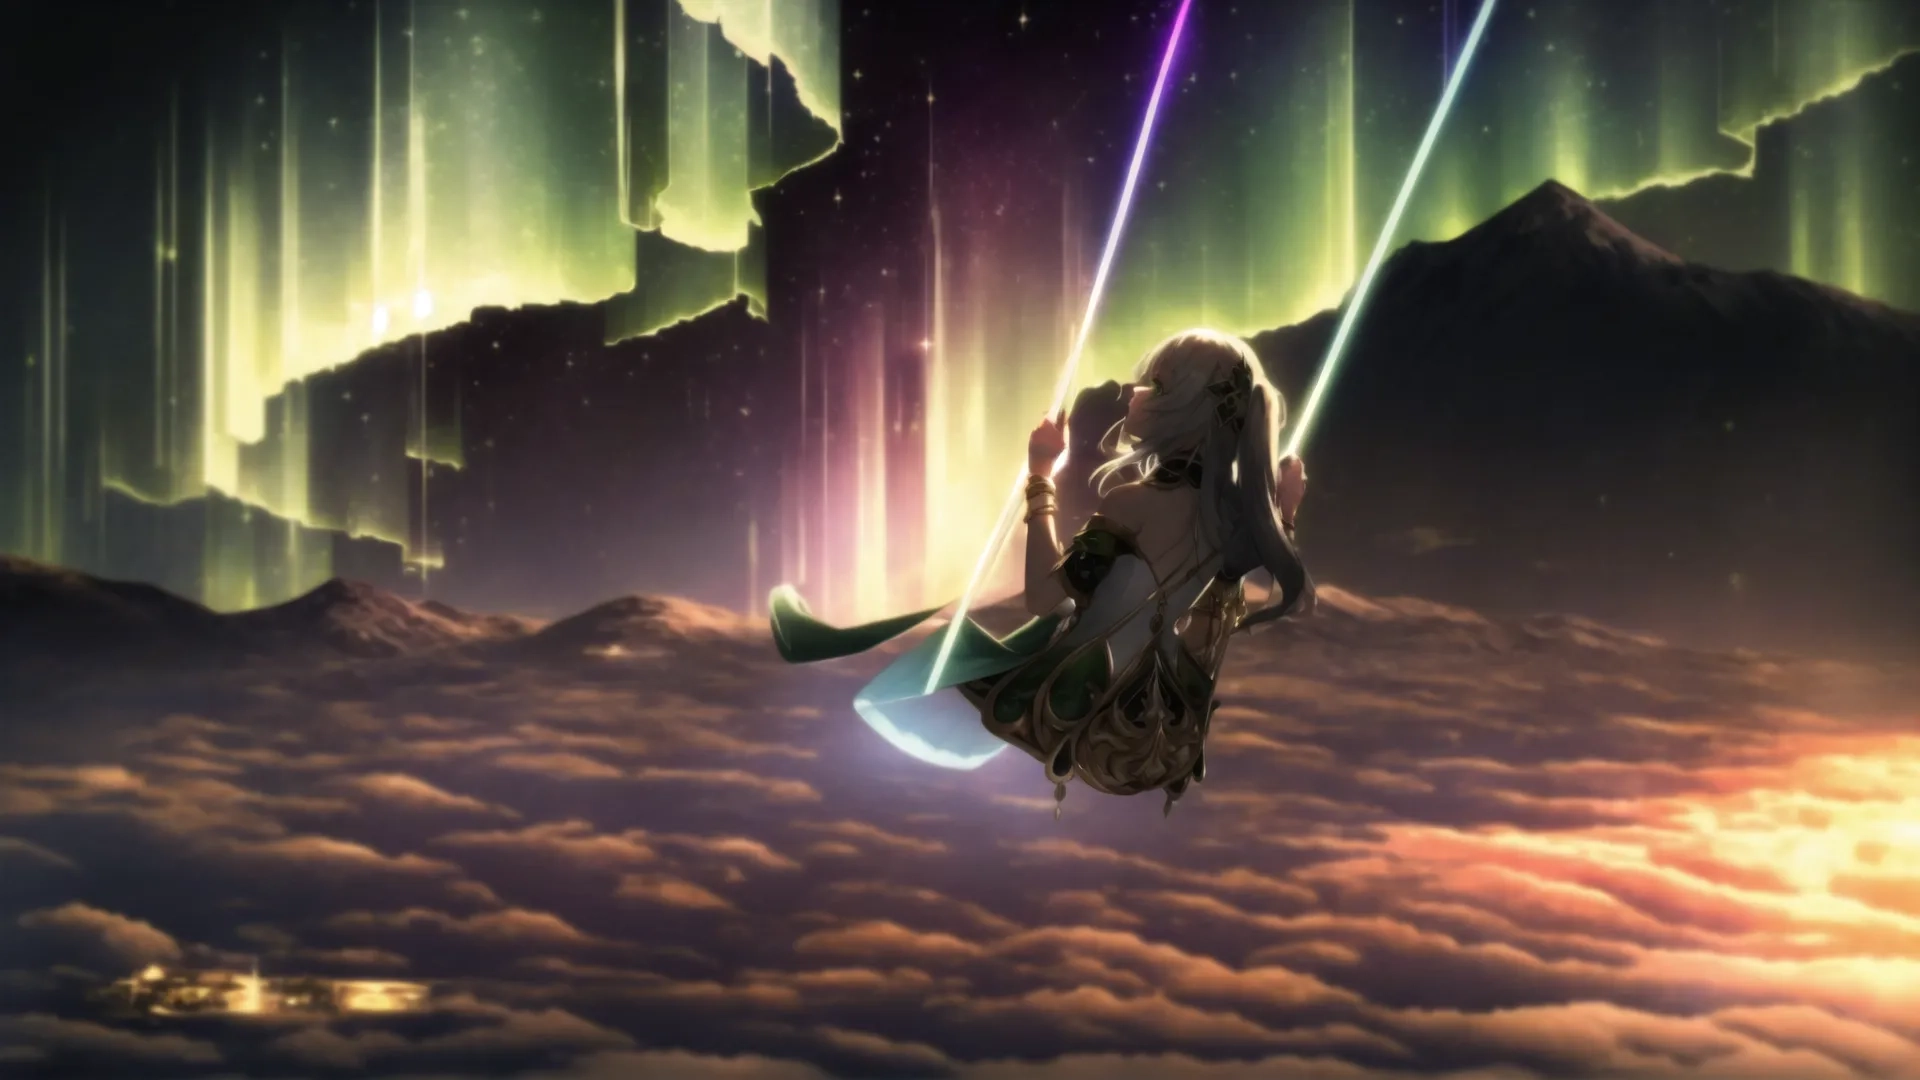 an anime man and woman riding on an aurora light in the sky beside aurora lights with green beams between them behind them while over bright clouds, there are neon sky
